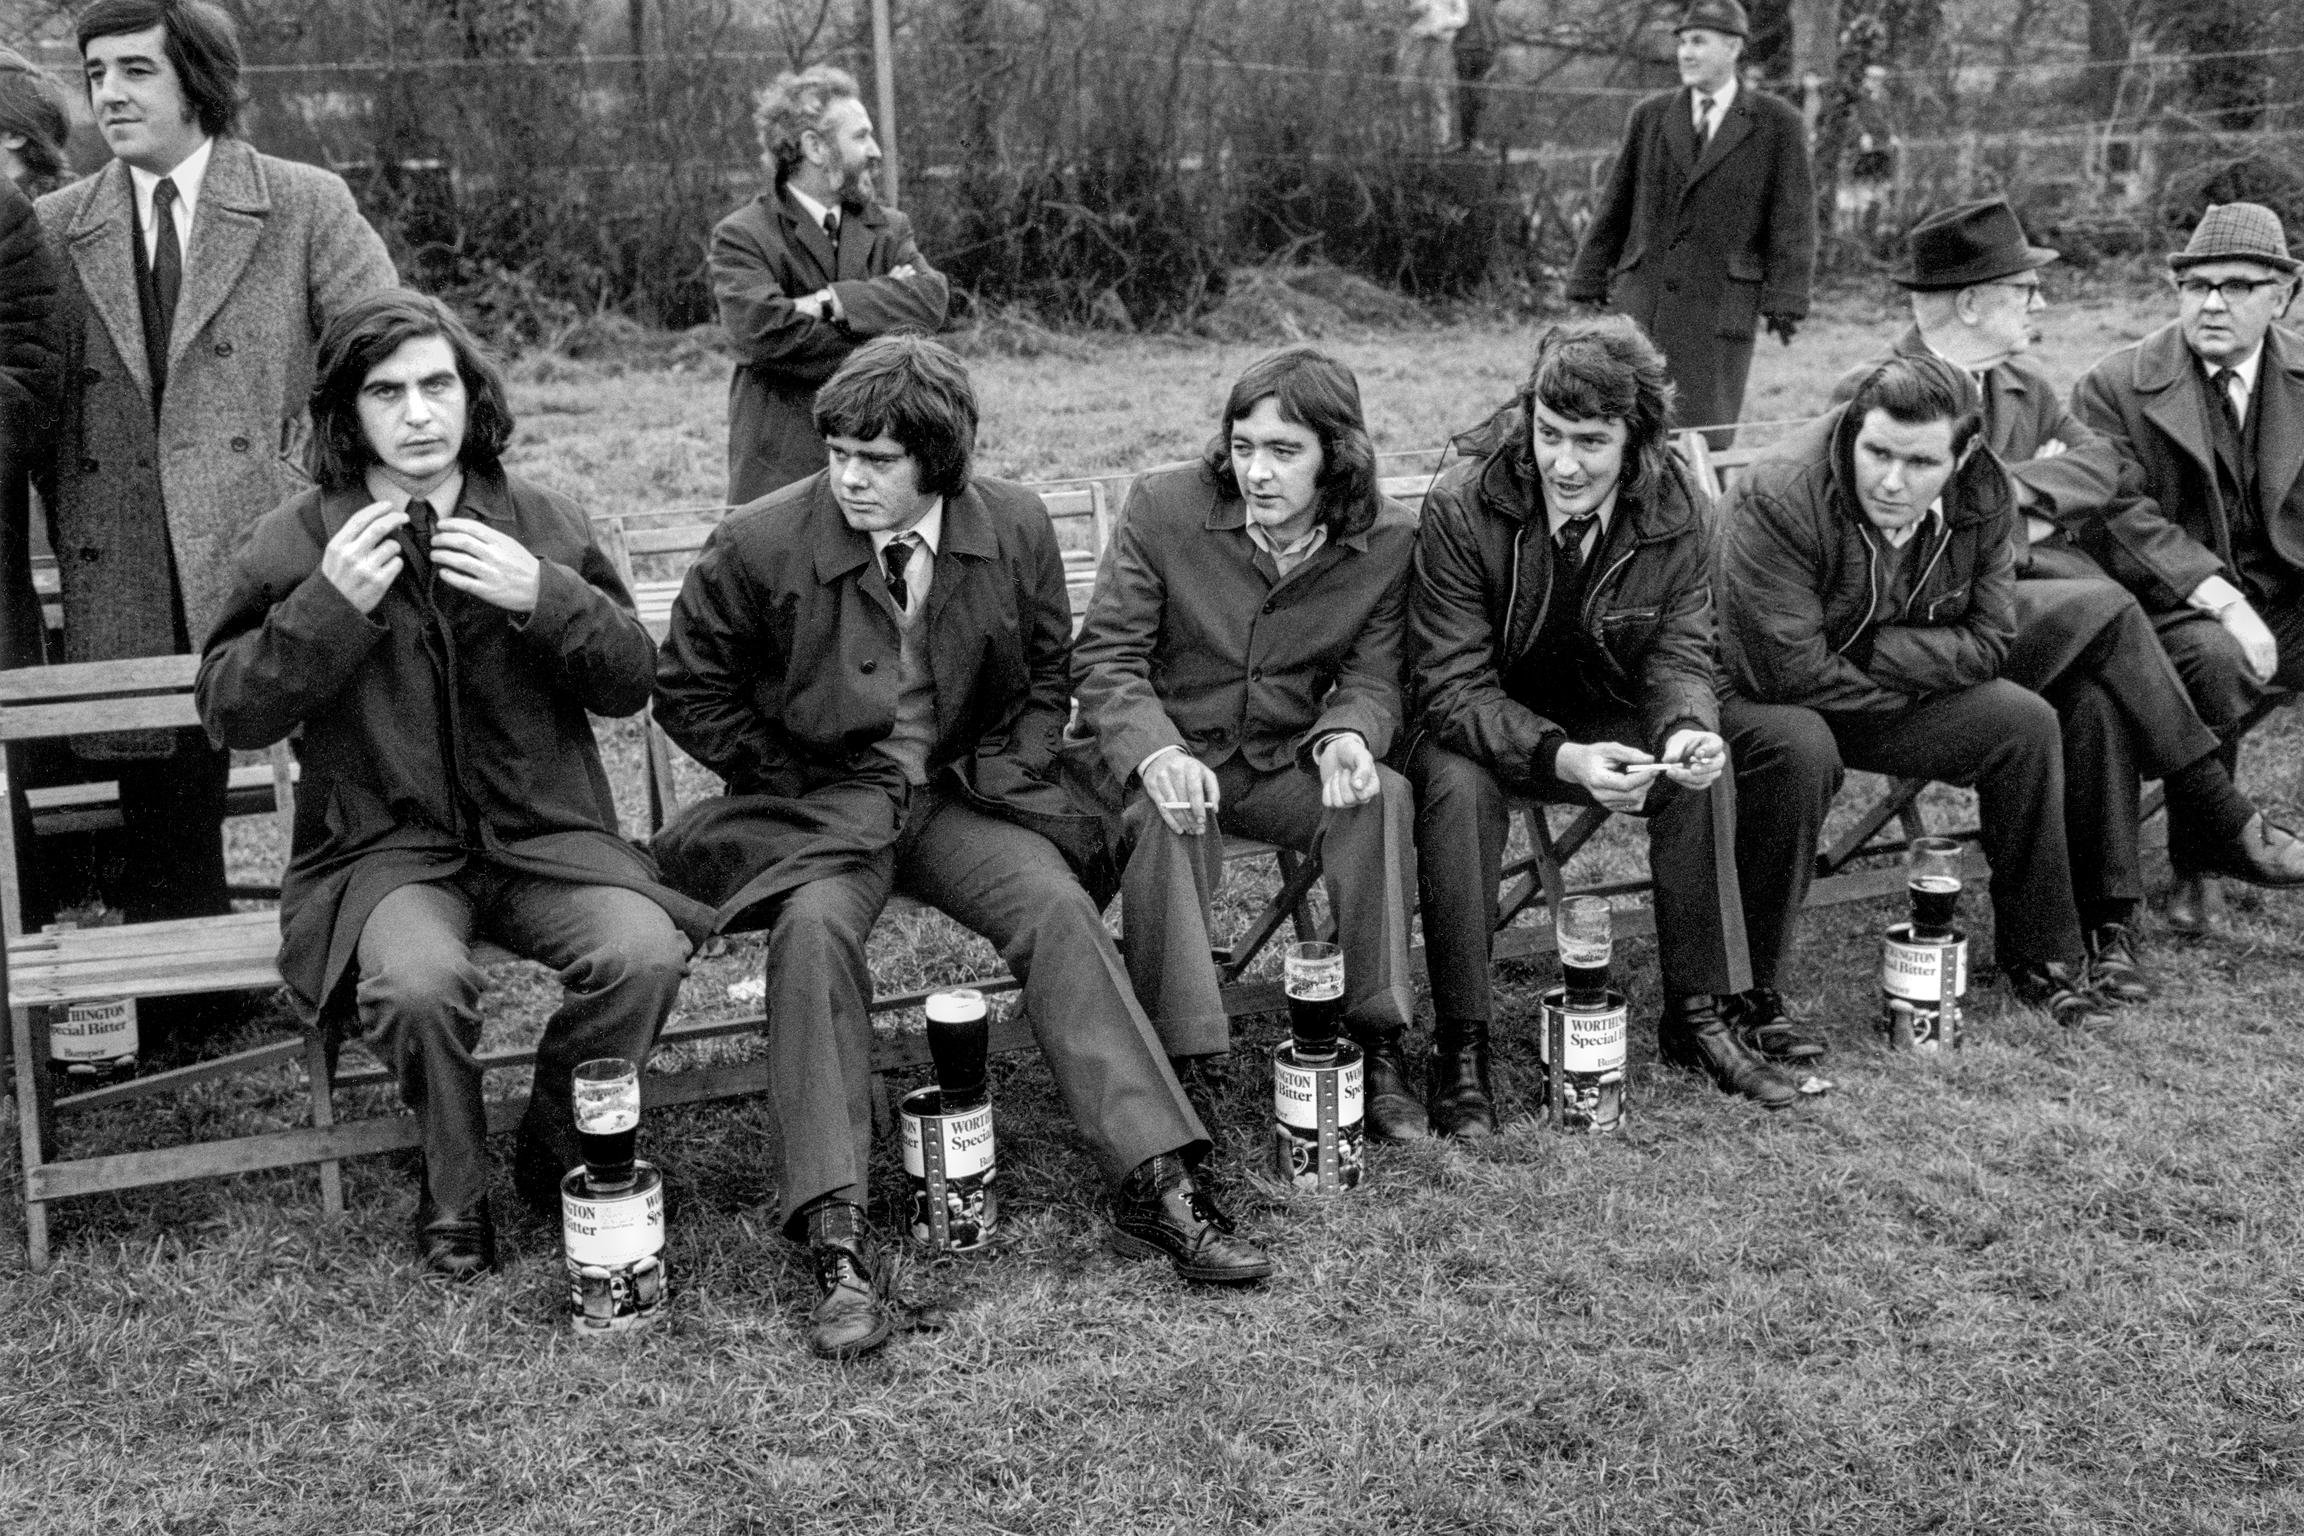 Spectators at an Old Boys rugby match. Beer seems an essential part of the whole macho experience. Rhondda Valley, Wales